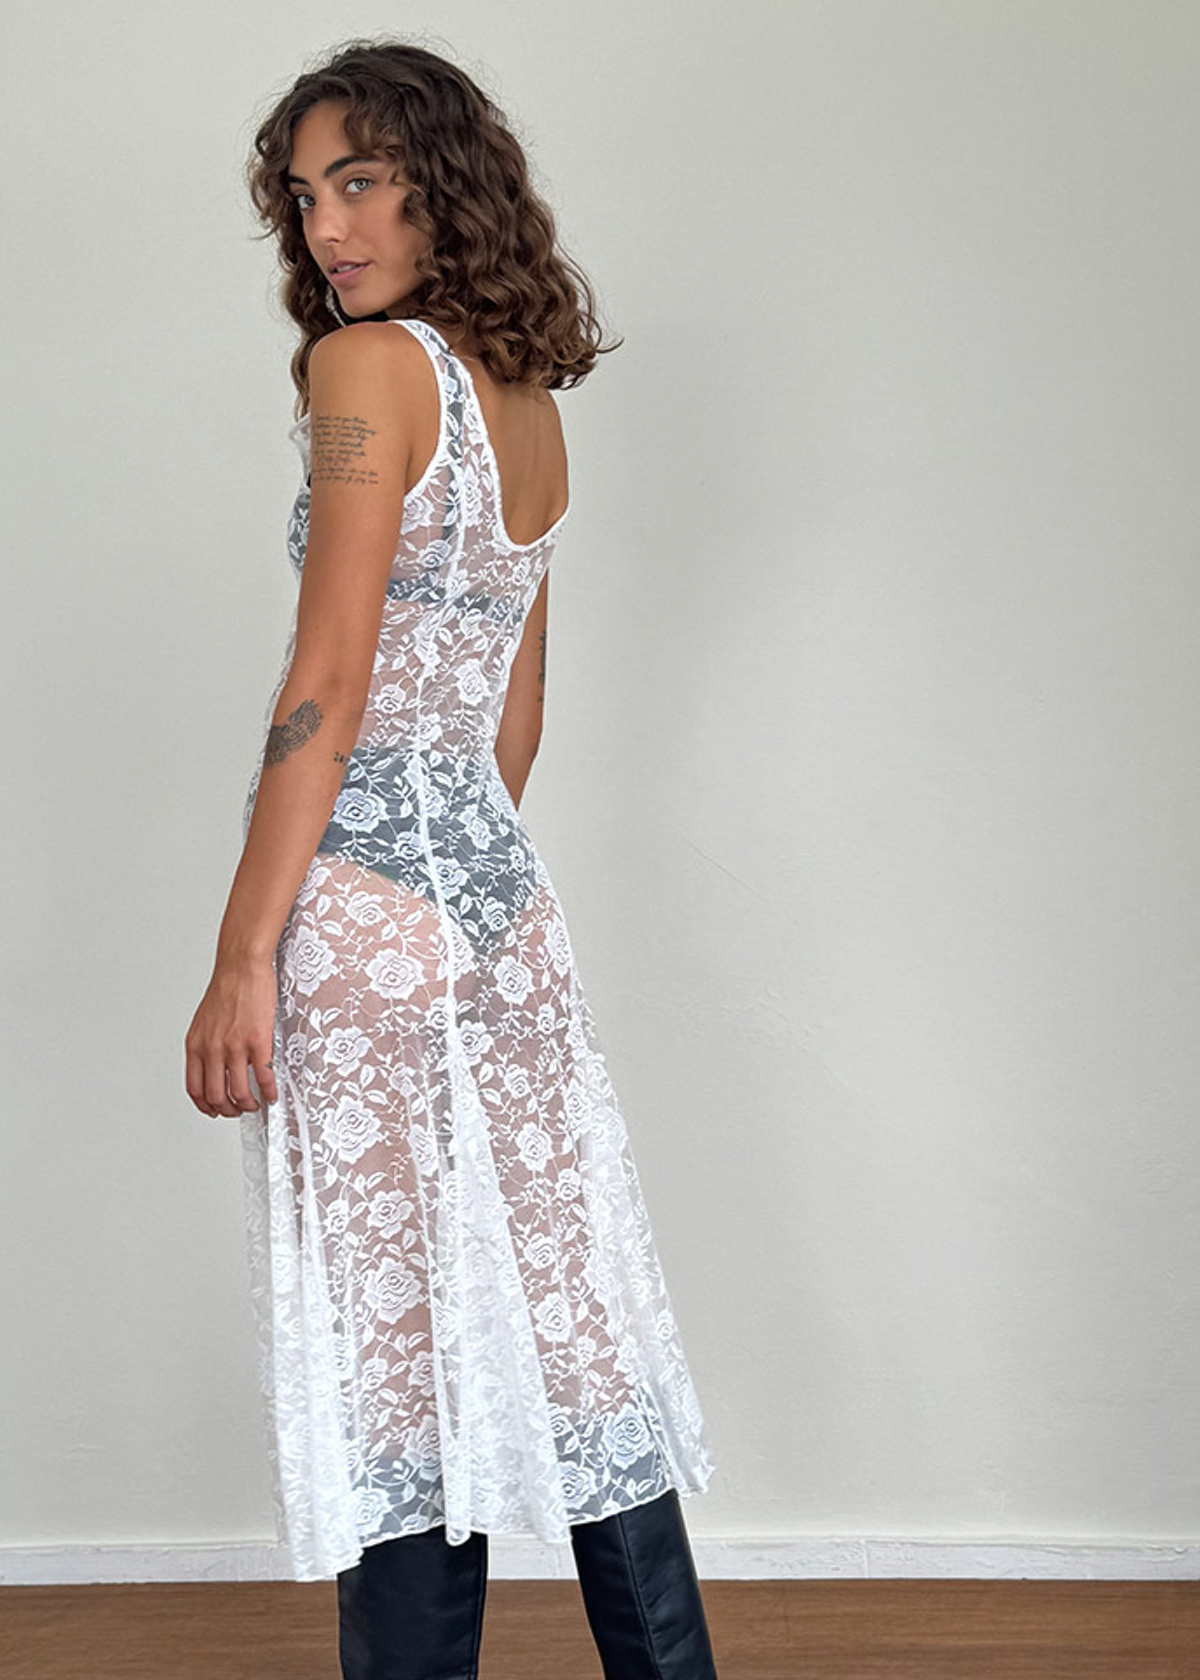 90s inspired sheer unlined white lace floral midi dress with sleeveless design and deep-v neckline by Motel Rocks